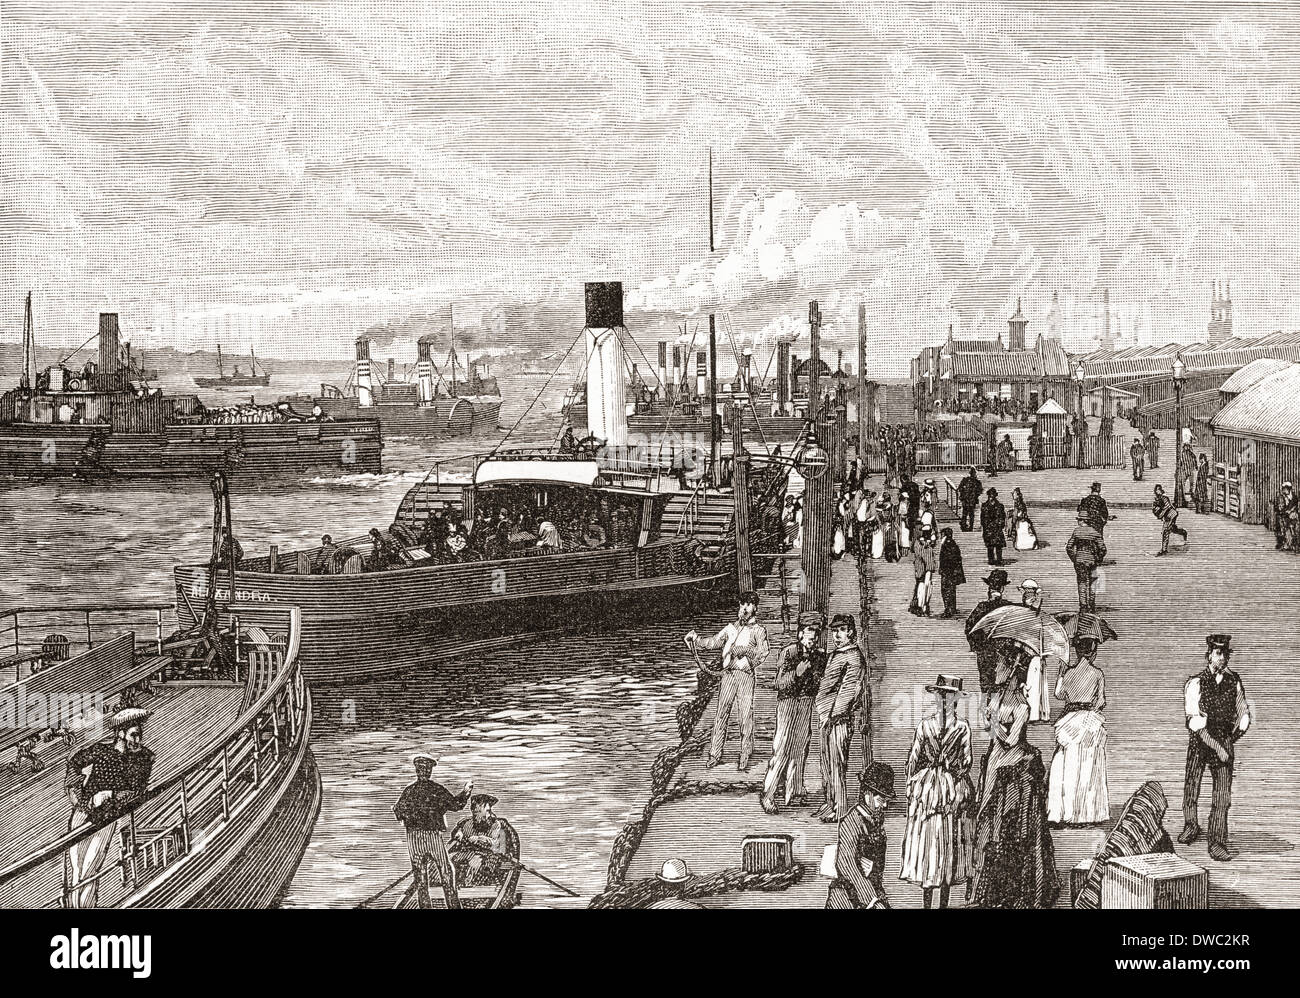 George's Landing Stage, Liverpool, Lancashire, England in the 19th century. Stock Photo